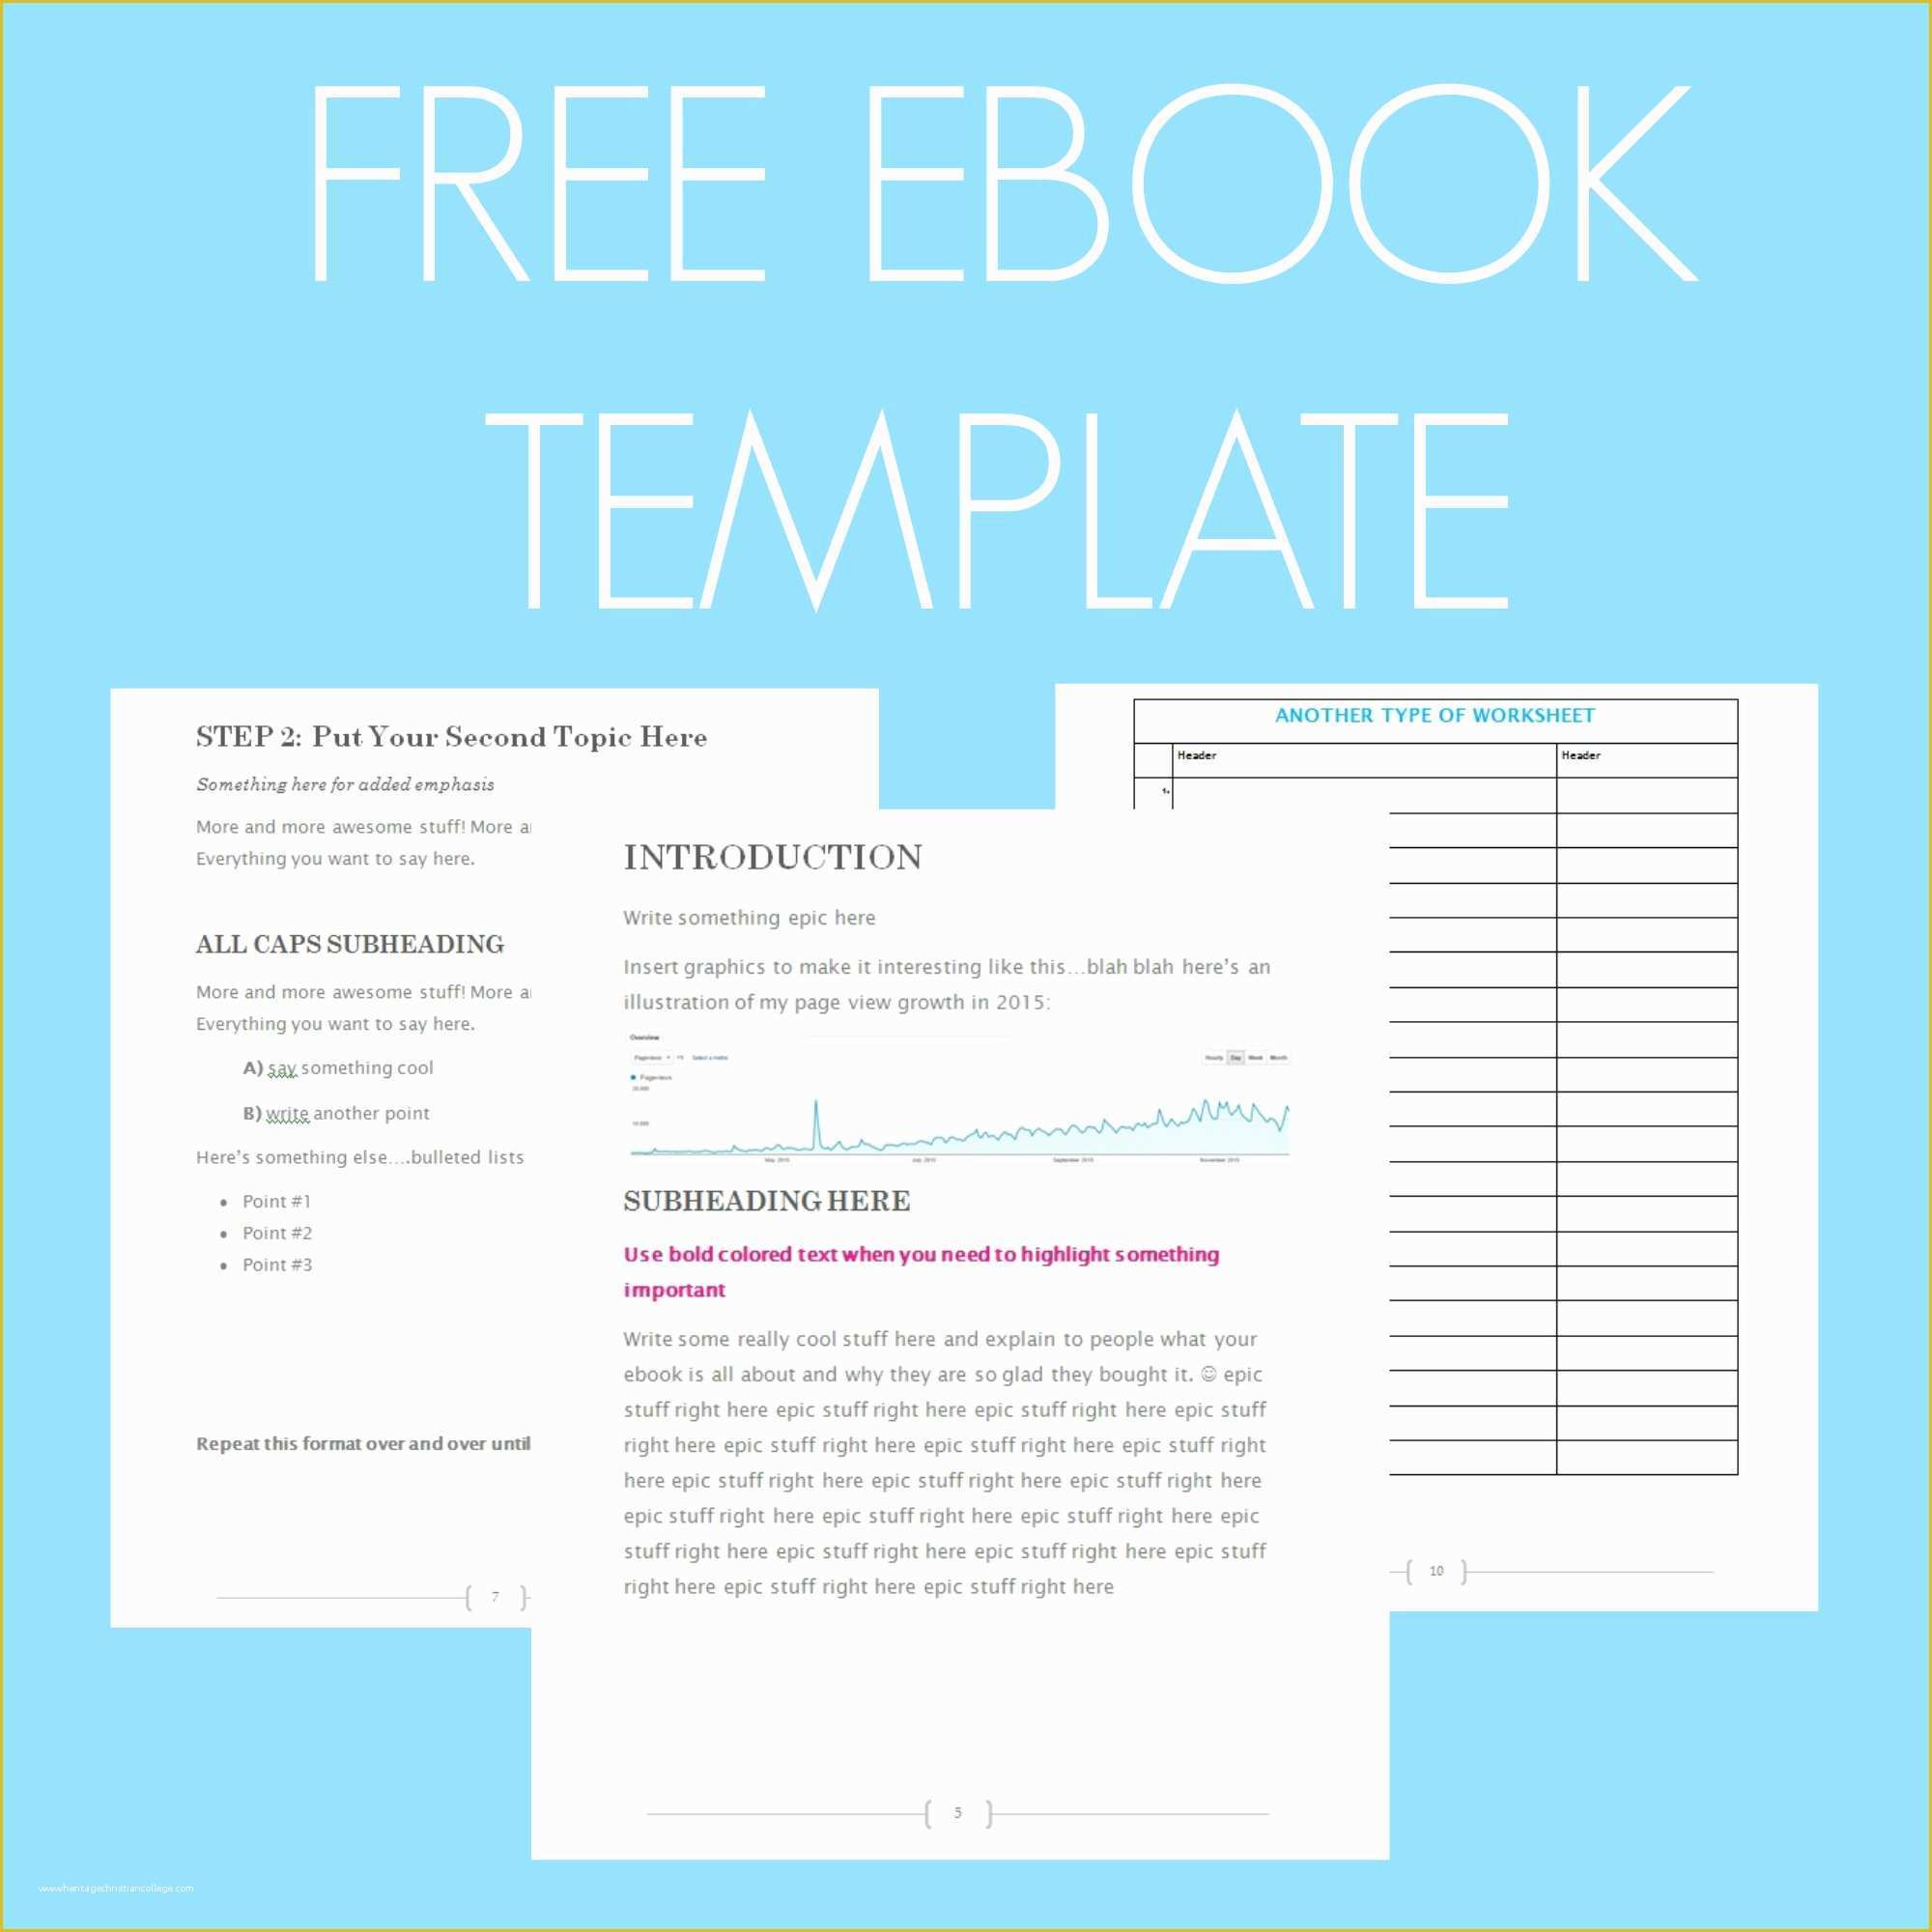 44 Free Ebook Templates for Word